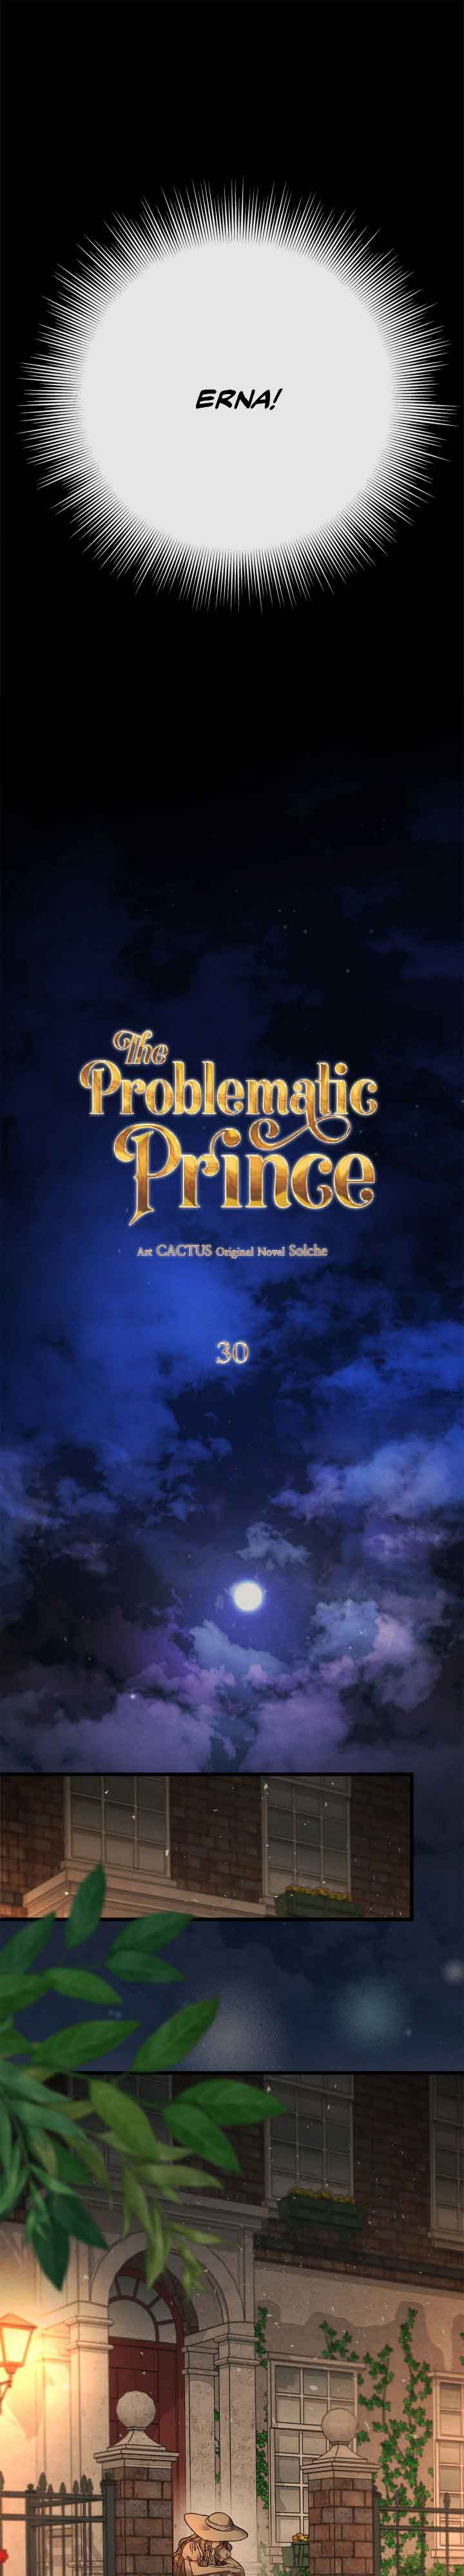 The Problematic Prince chapter 30